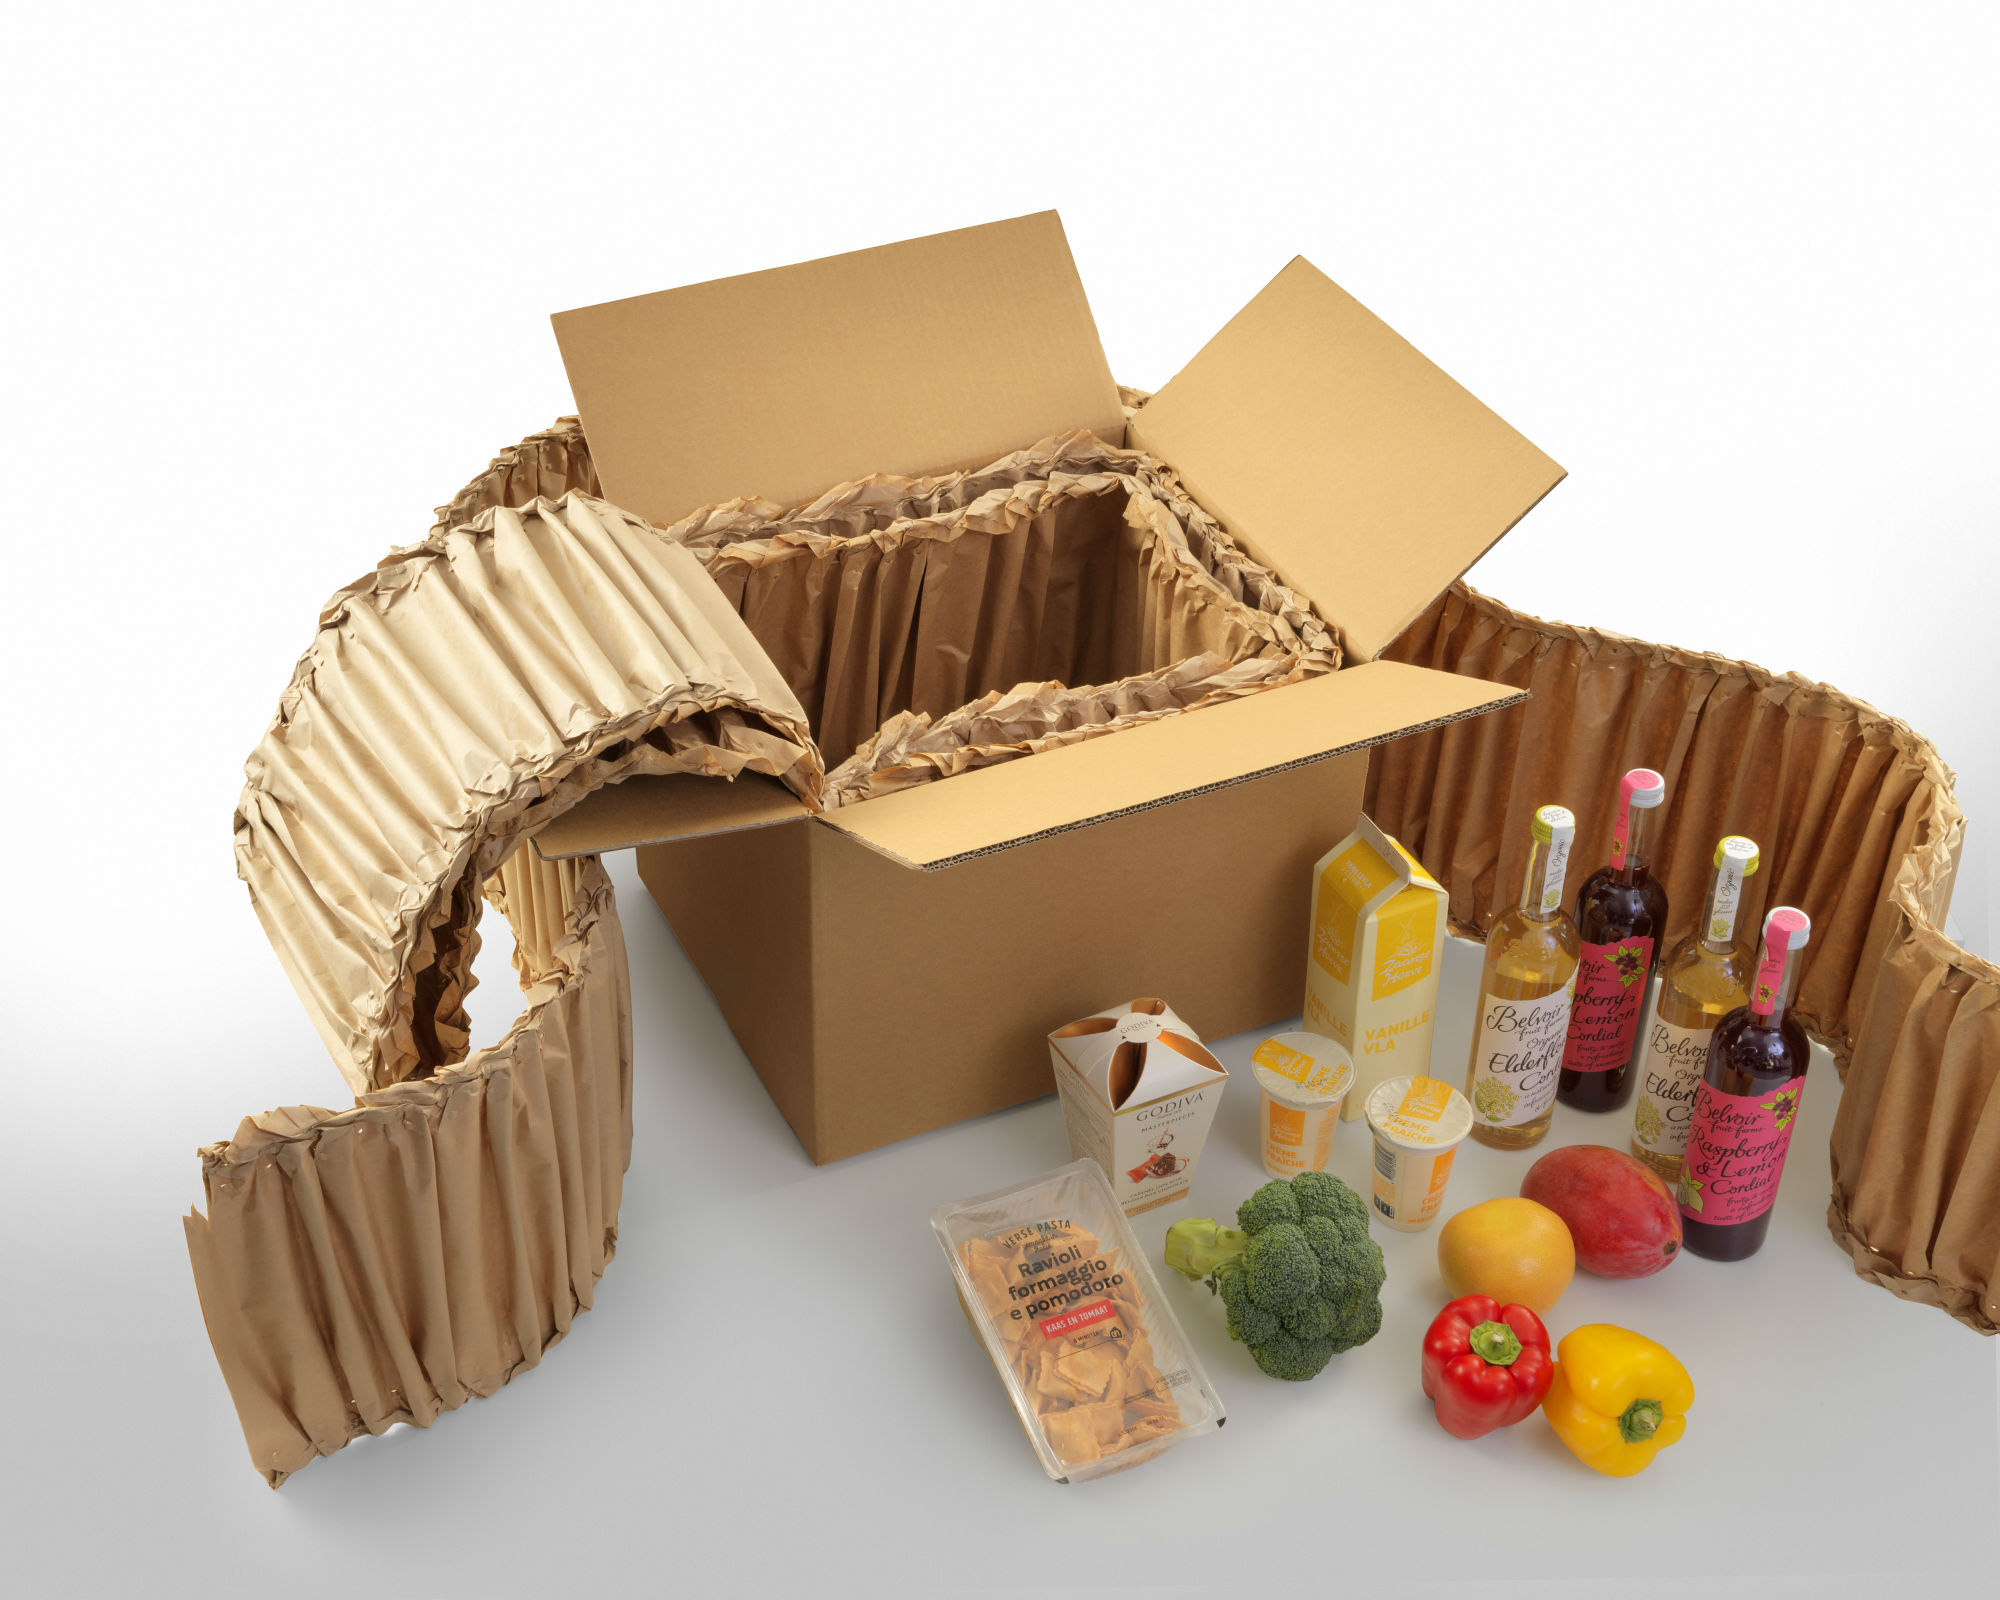 Different materials. Innovative Packaging. Recyclable materials. Casa gi упаковка. Package for materials.